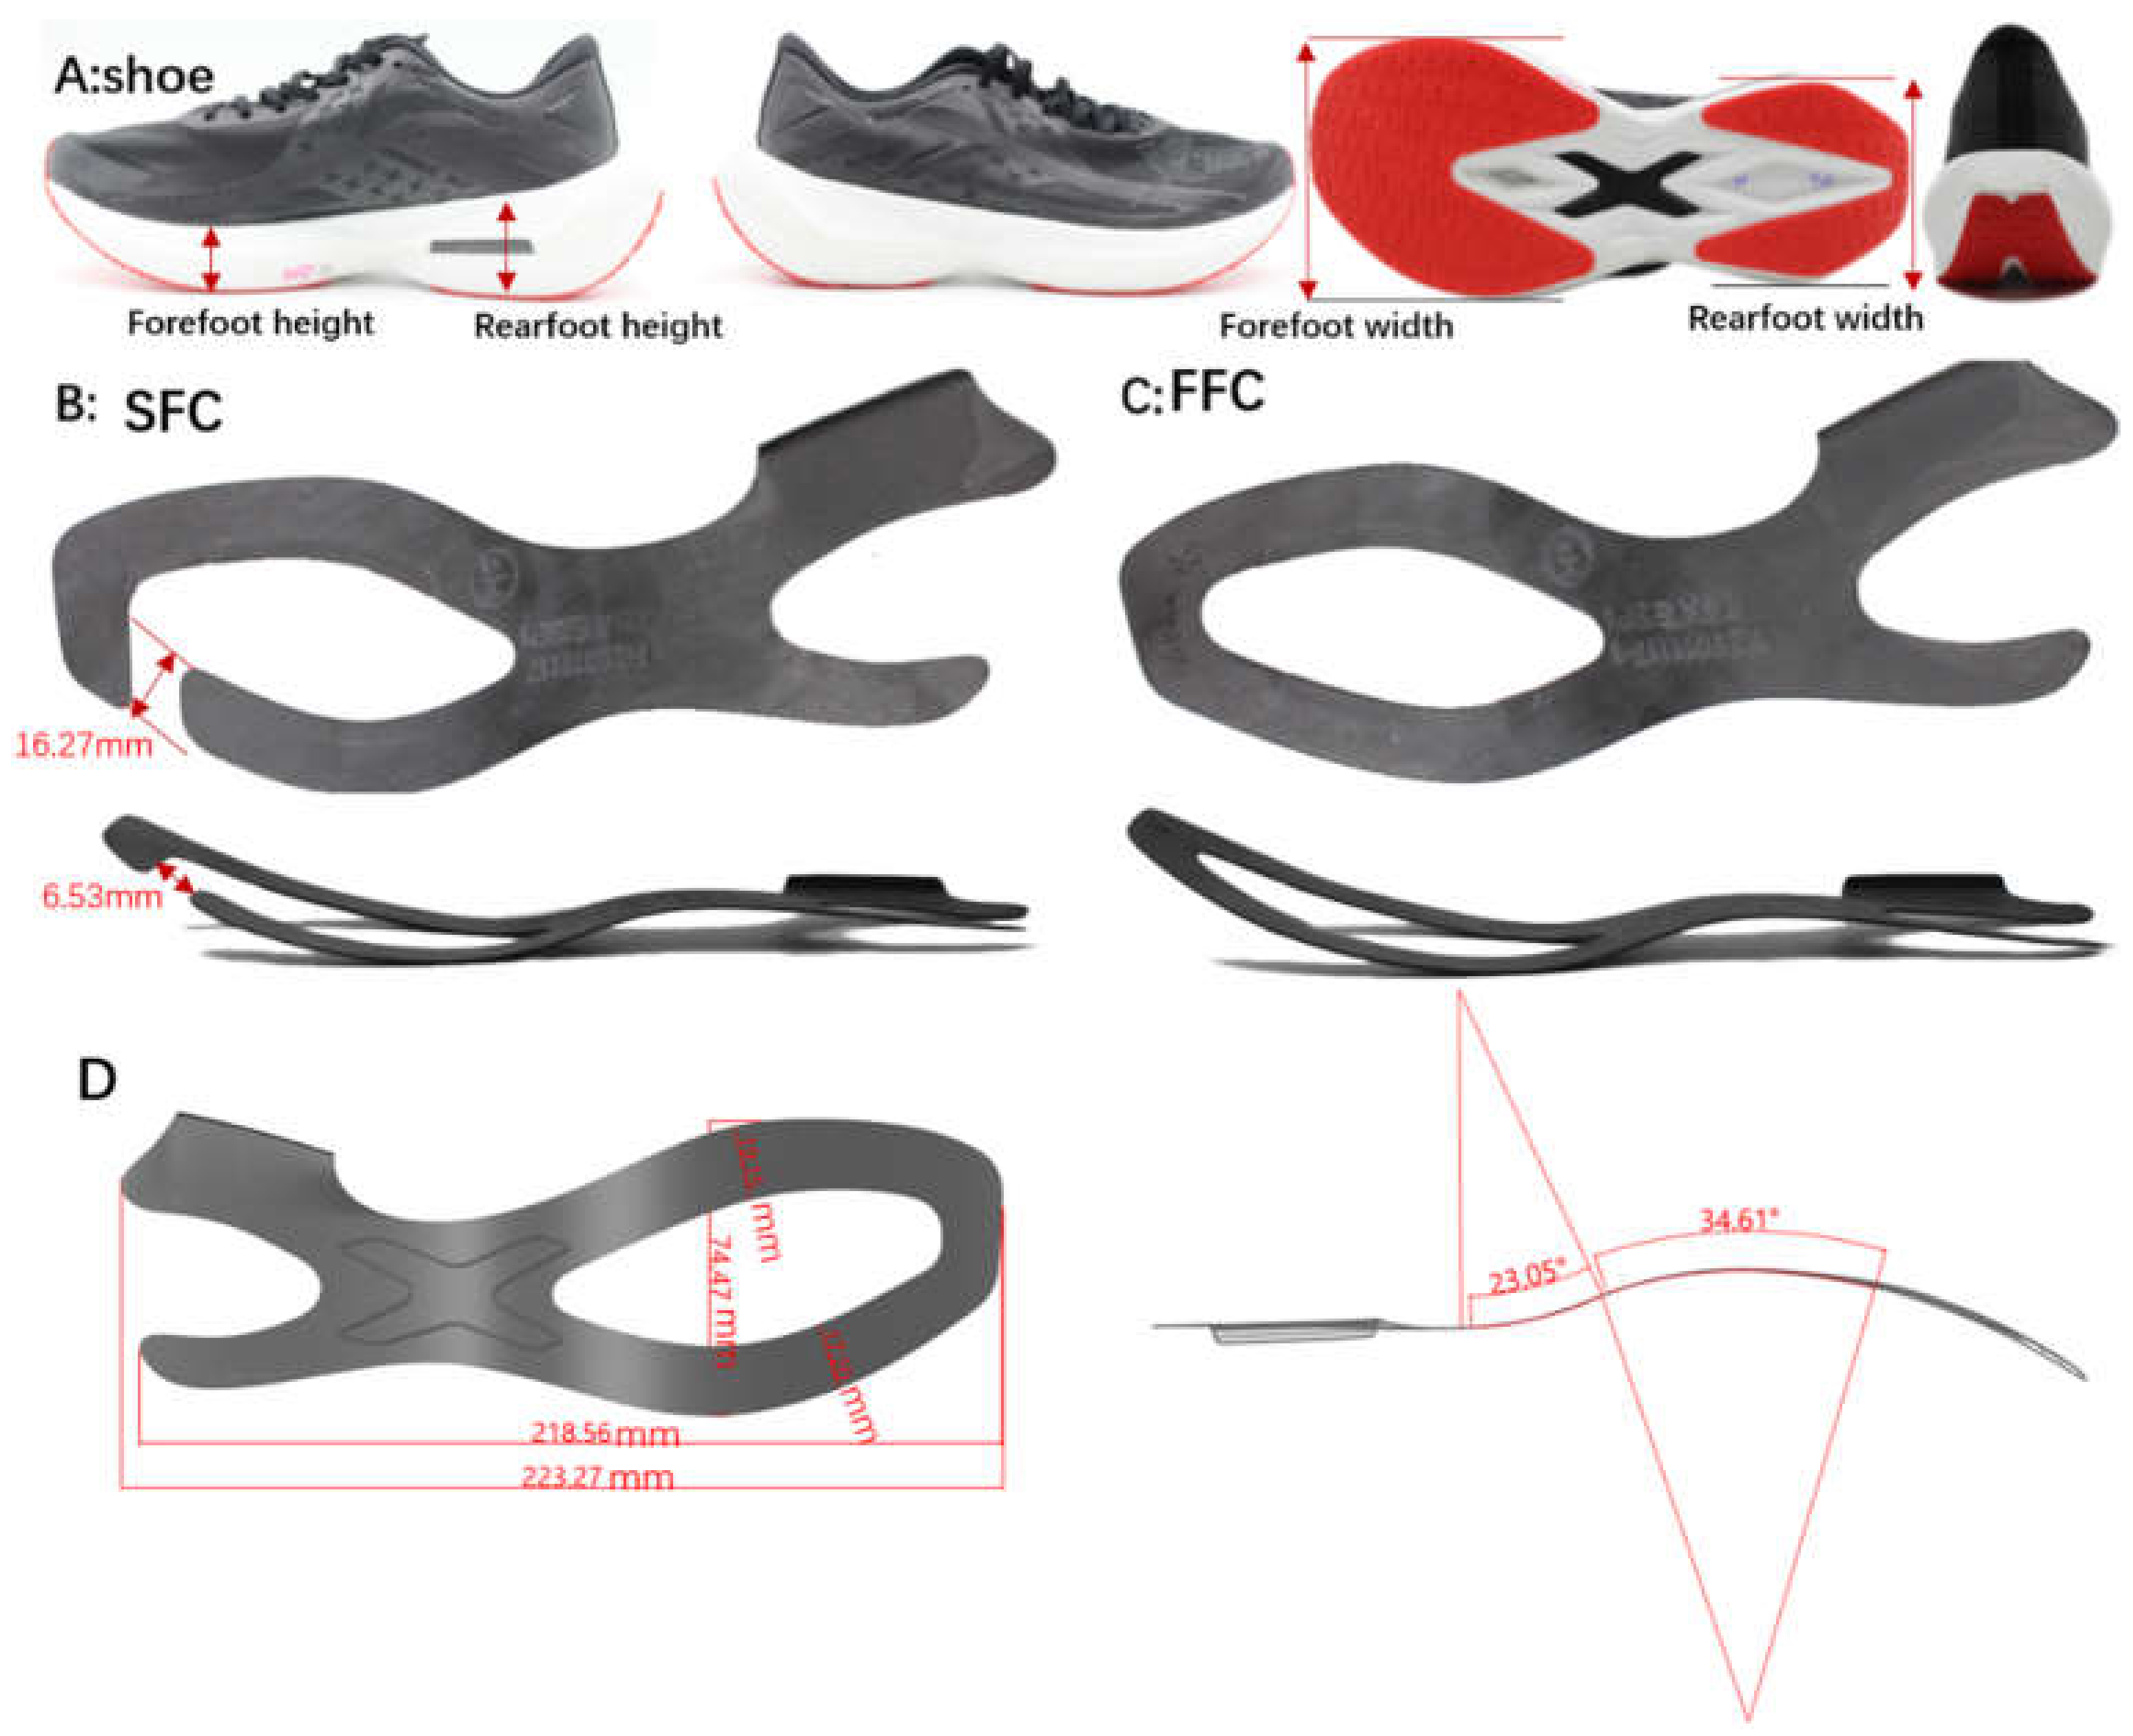 Materials | Free Full-Text | Effect of the Construction of Carbon Fiber  Plate Insert to Midsole on Running Performance | HTML